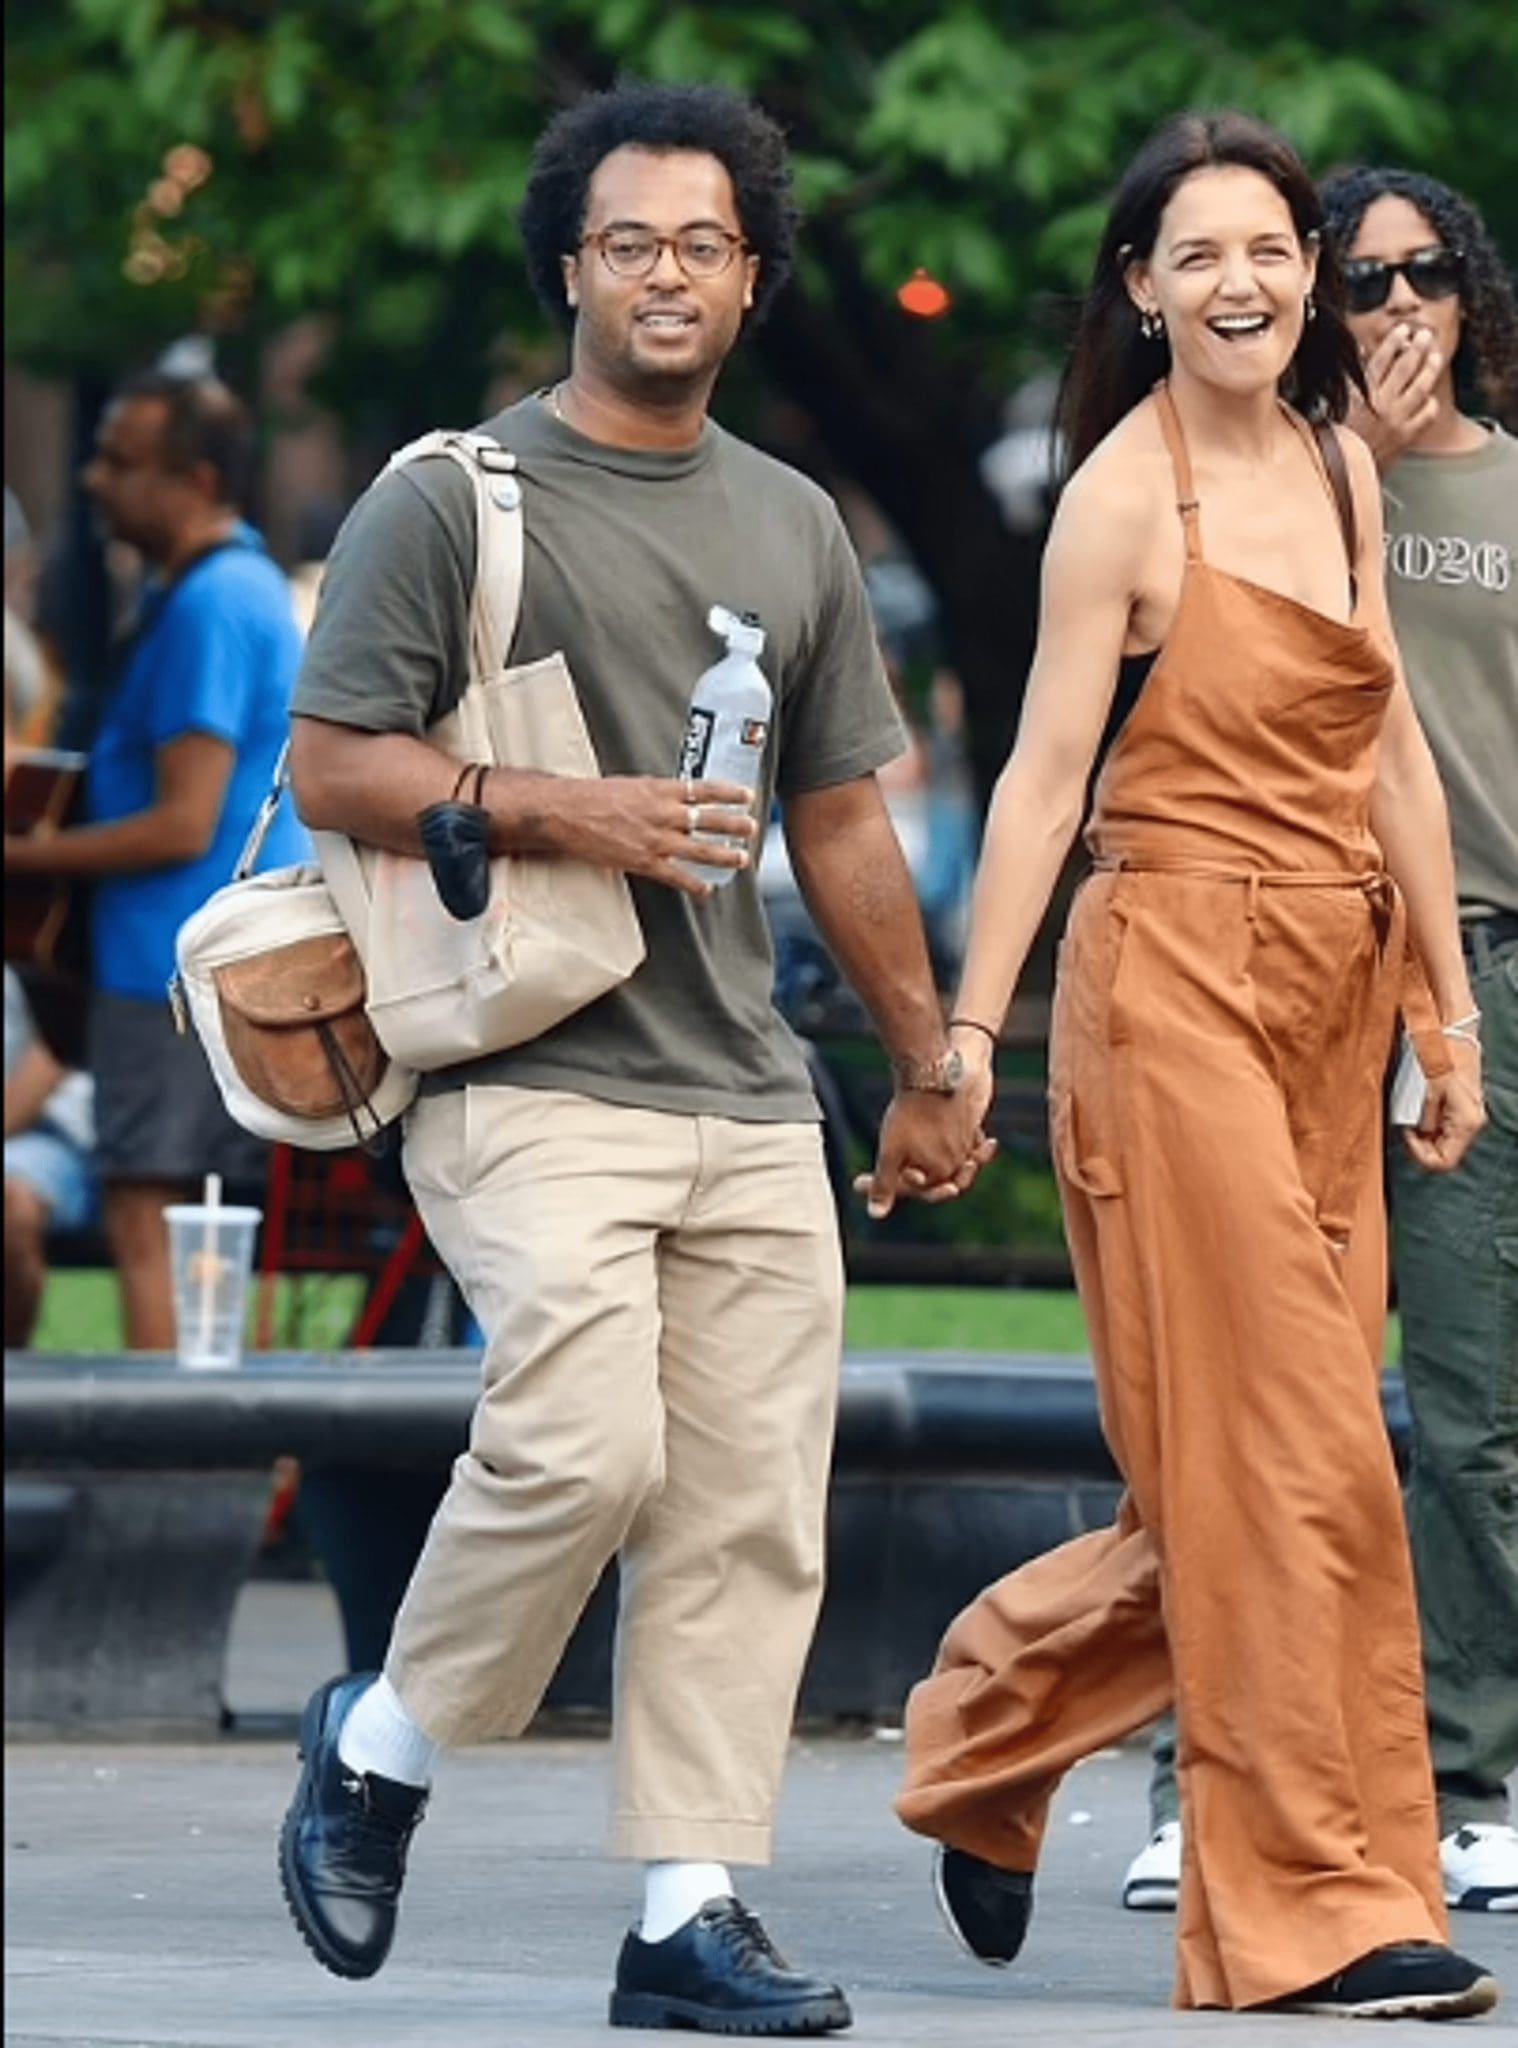 Katie Holmes Goes Out With Beau Bobby Wooten III In A Beautiful Baggy Jumpsuit